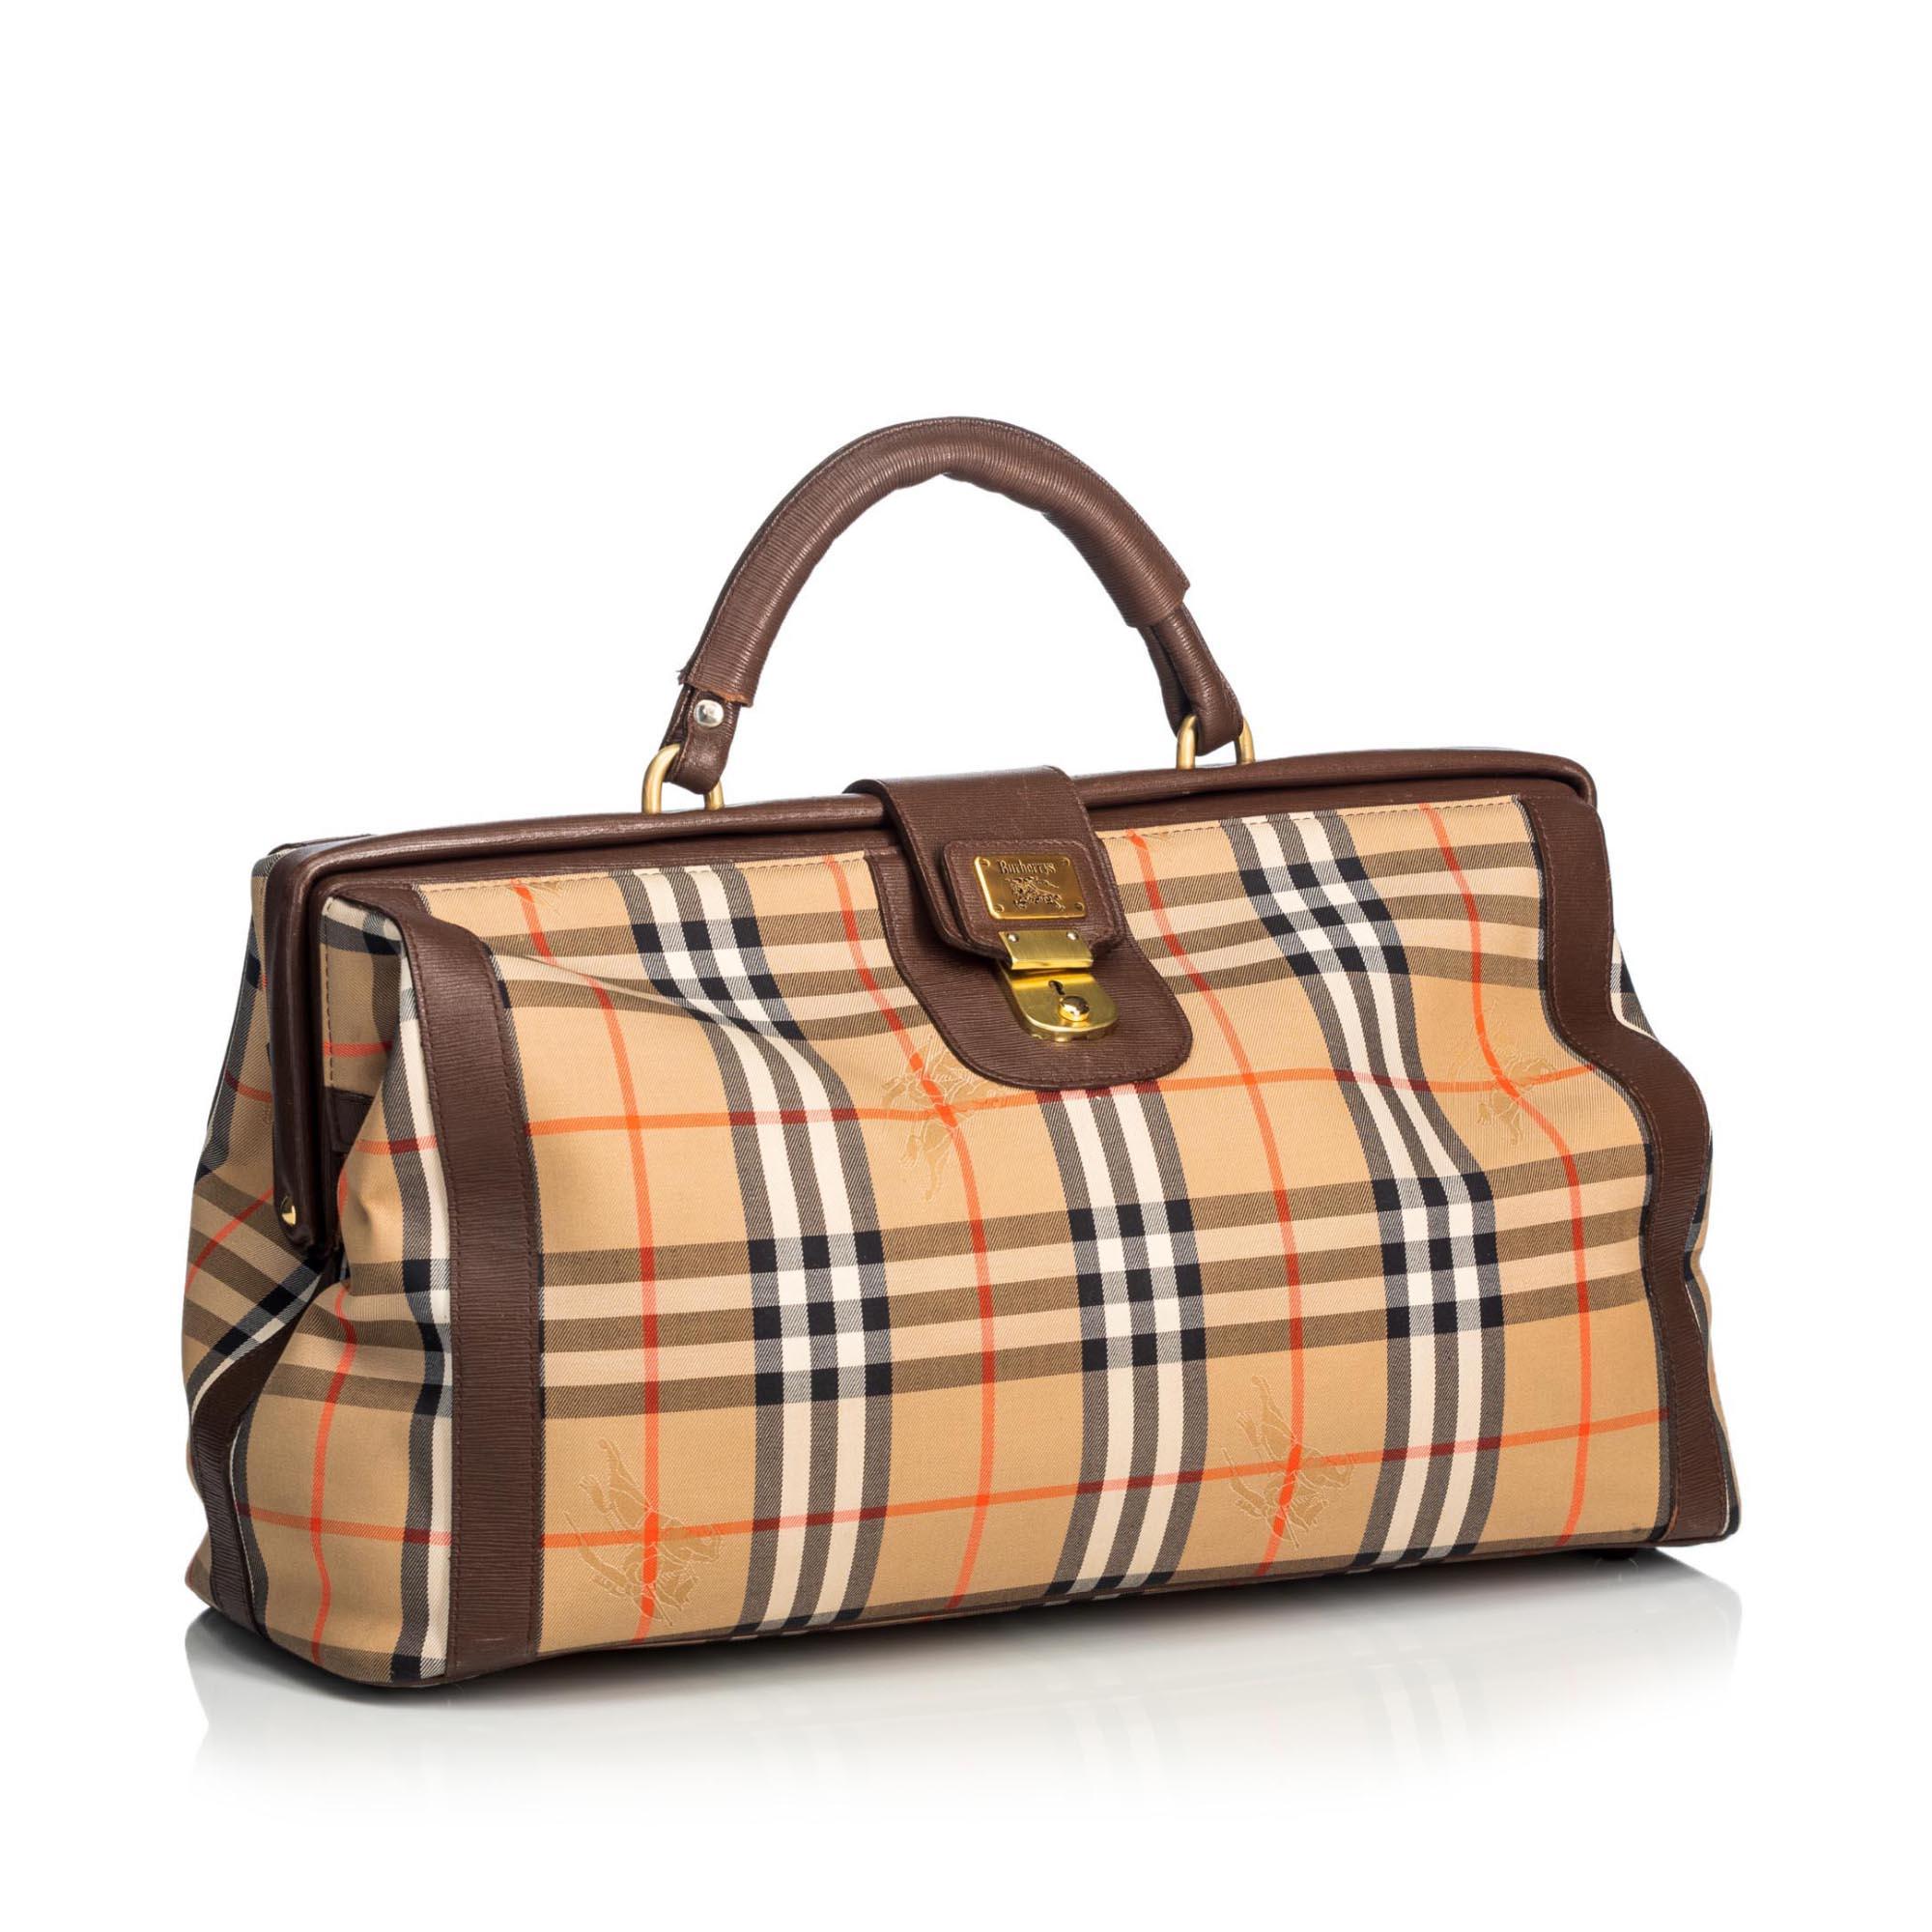 This duffle bag features a canvas body with leather trim, rolled leather handles, a top leather lock strap, and a clasp closure. It carries as B+ condition rating.

Inclusions: 
This item does not come with inclusions.

Dimensions:
Length: 25.00